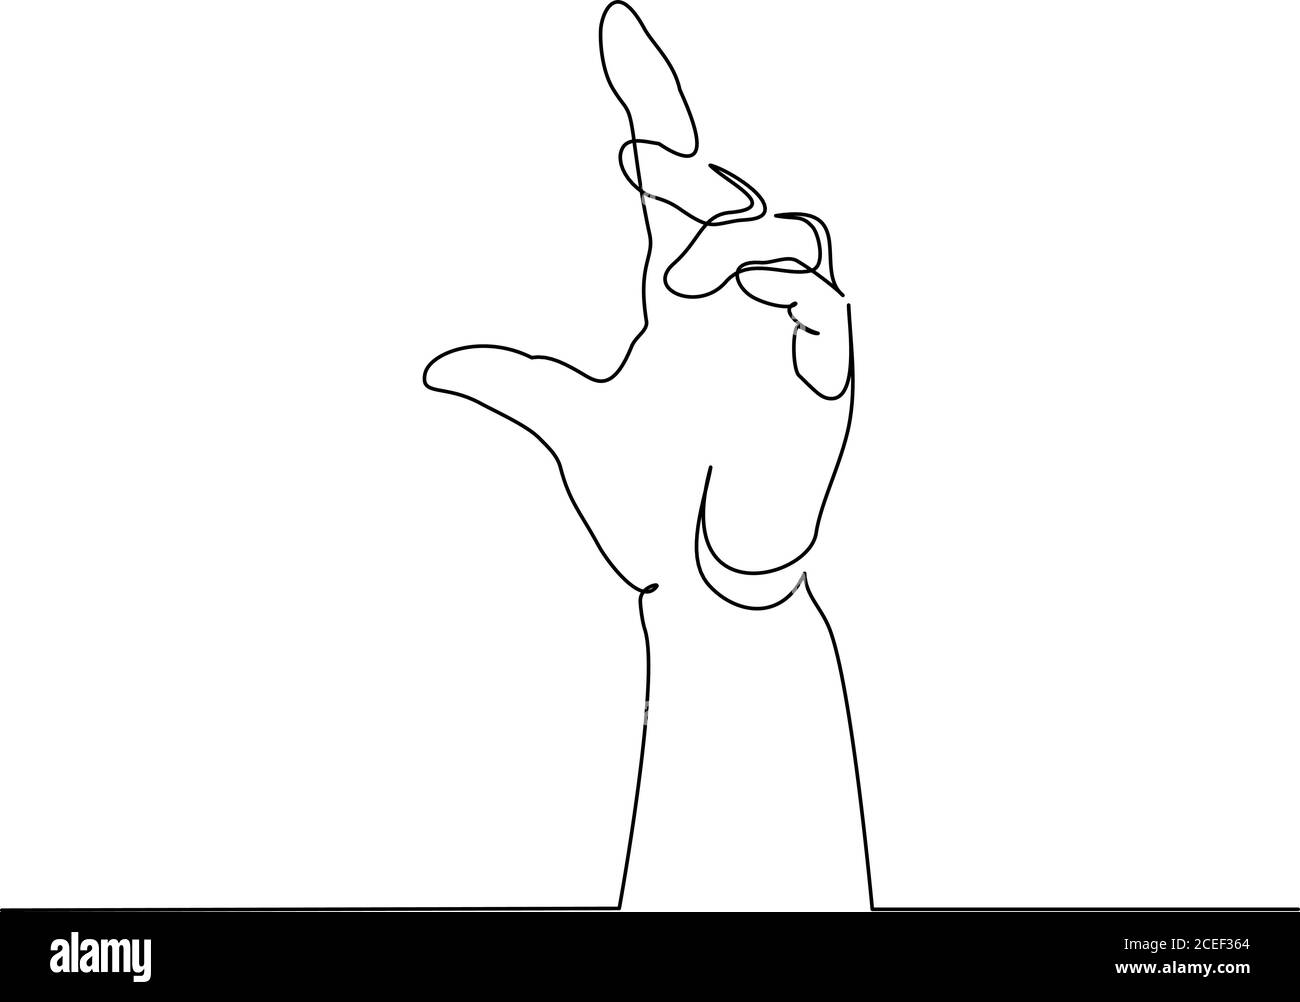 Hand showing something sign. Continuous one line art drawing style. Black linear sketch isolated on white background. Vector illustration Stock Vector